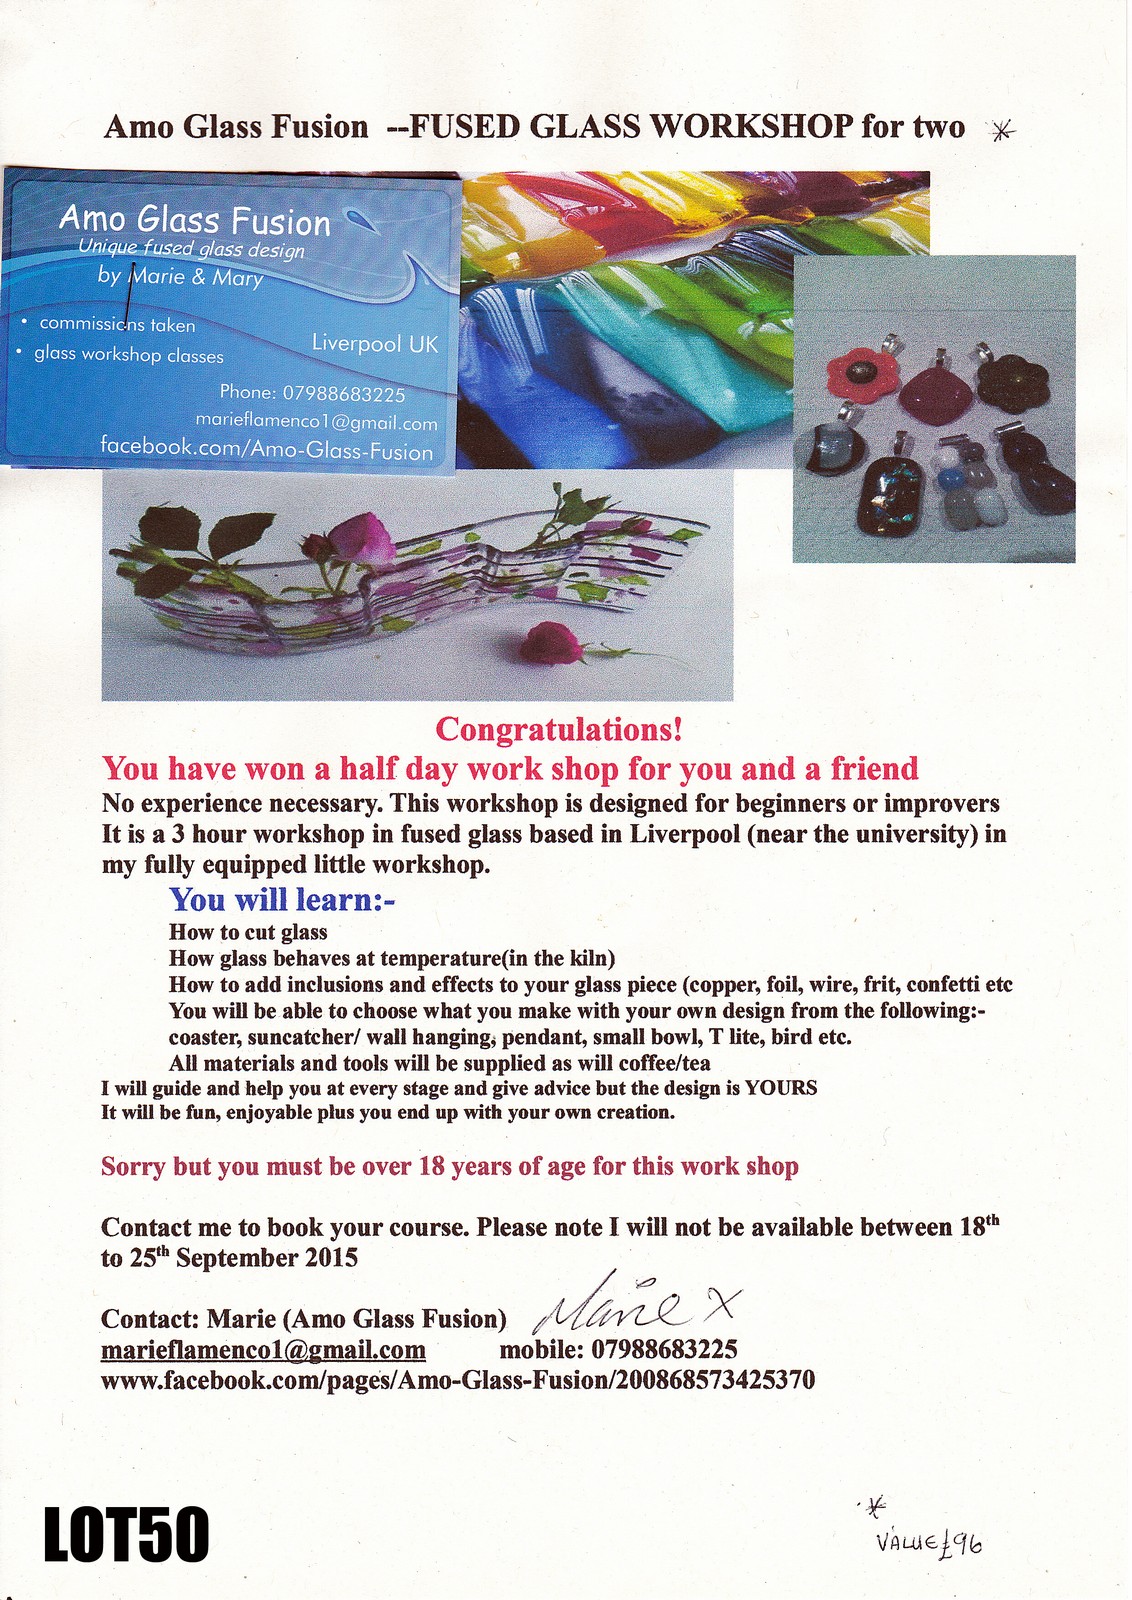 FUSED GLASS WORKSHOP for two – Amo Glass Fusion – a half day workshop for two in fused glass based